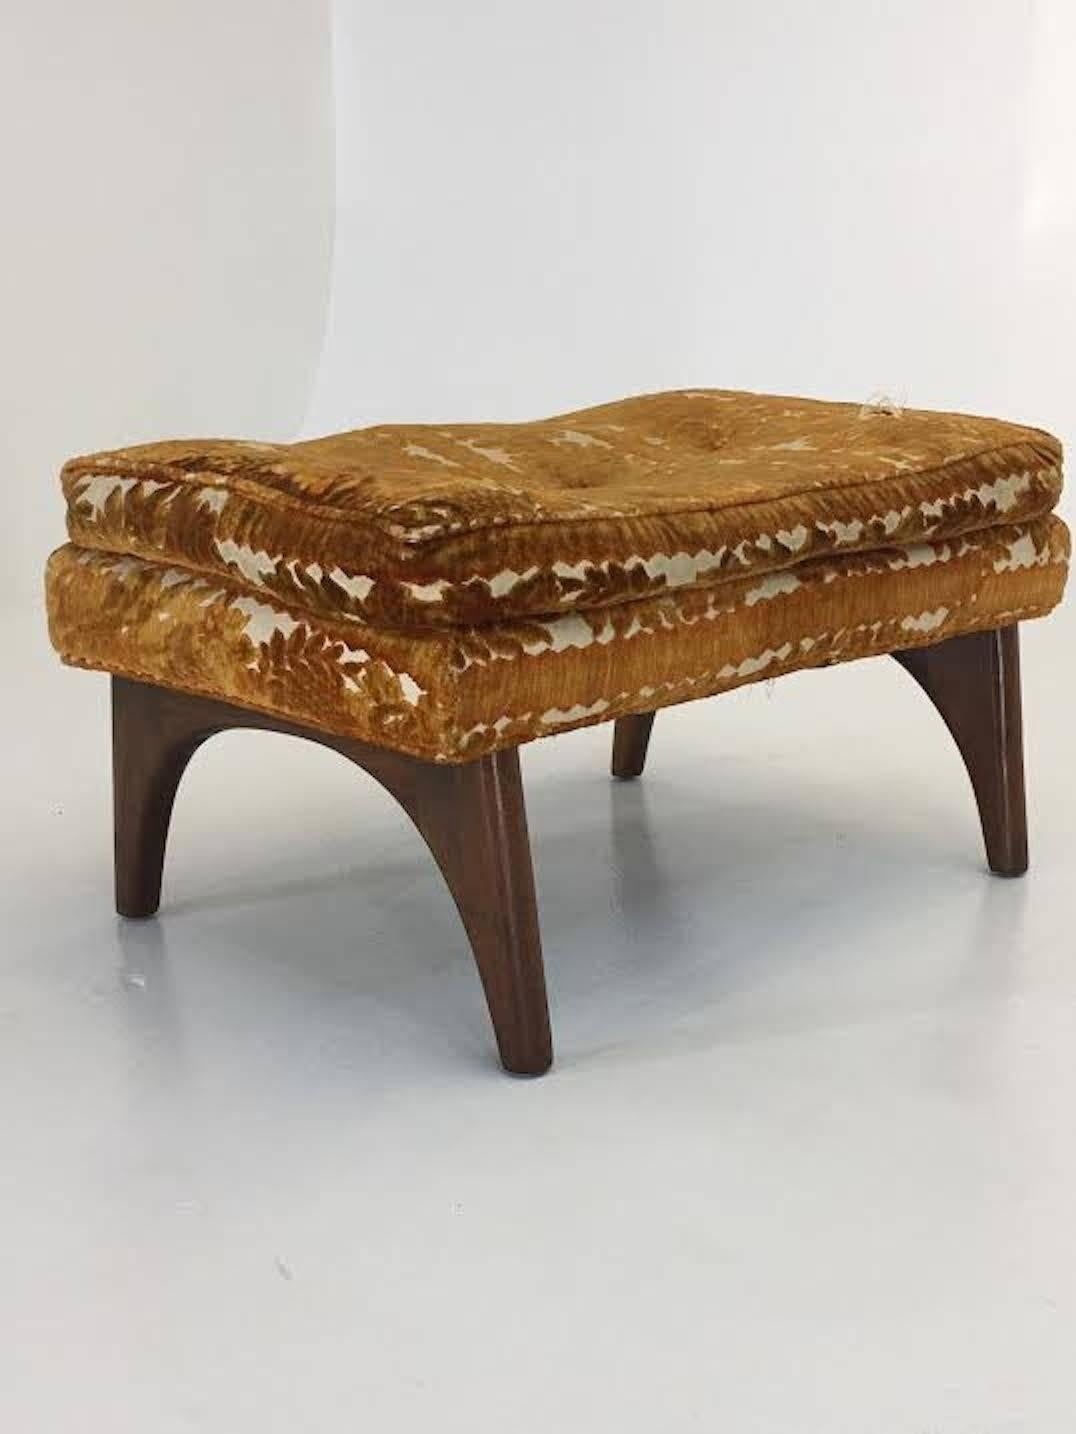 Ottoman
Chair ottoman, circa 1960
Walnut,
Attributed to Adrian Pearsall, Craft Associates, USA
Measures: 14 to 17 tall x 17 deep and 26 inches wide.

Unsigned, and attributed to Adrian Pearsall. This ottoman has complex internal construction